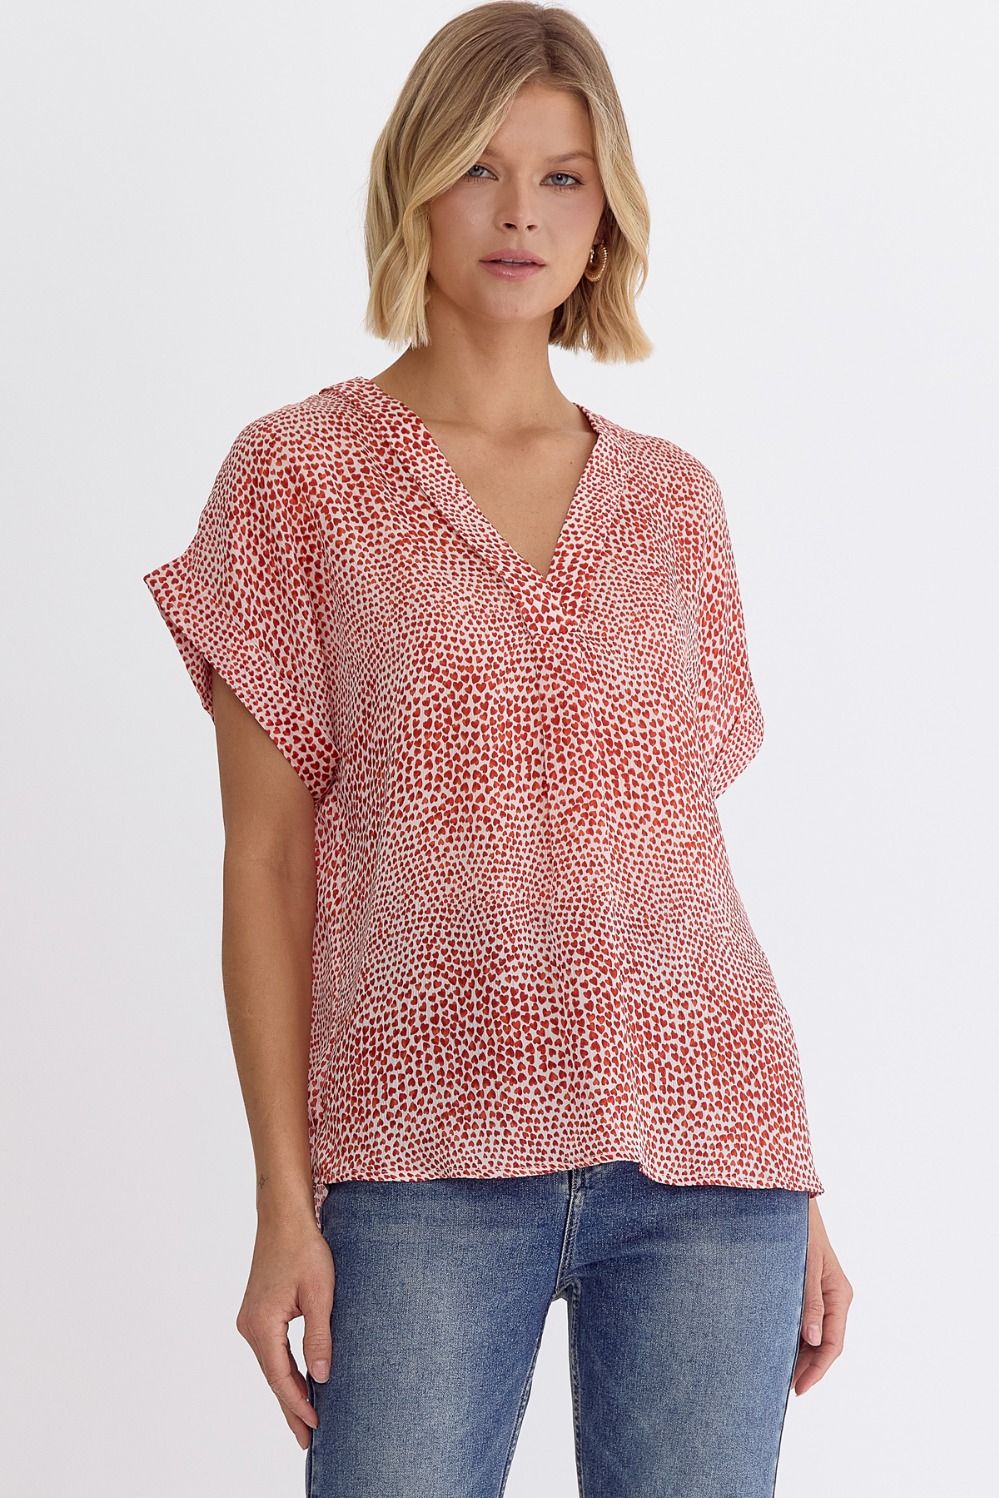 Red Heart Mary Top